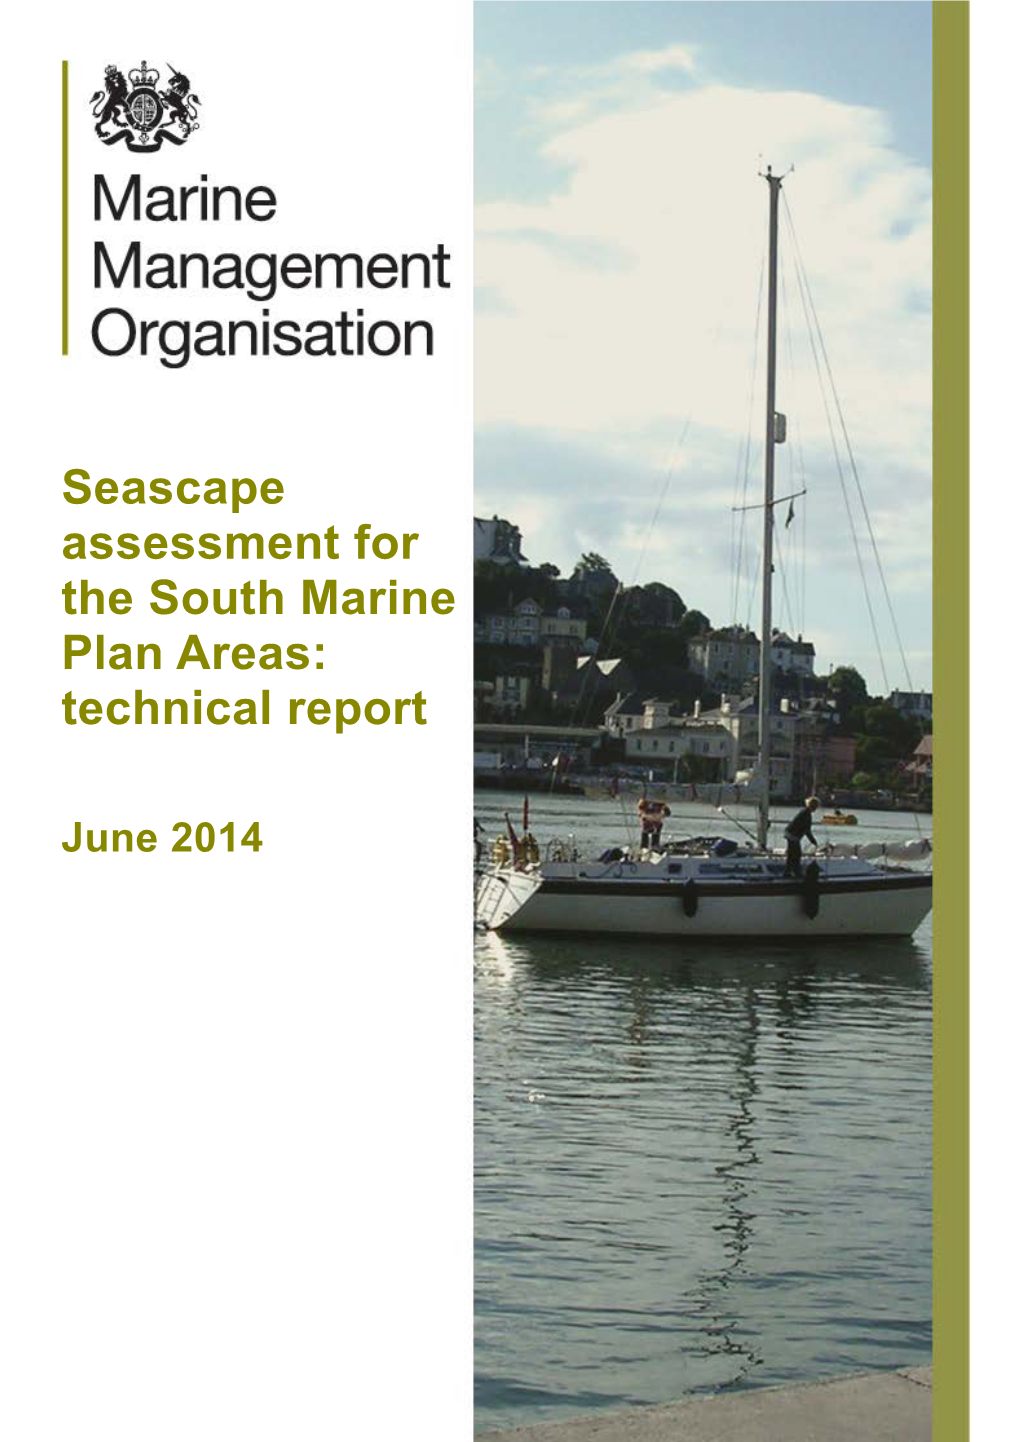 Seascape Assessment for the South Inshore and Offshore Marine Plans